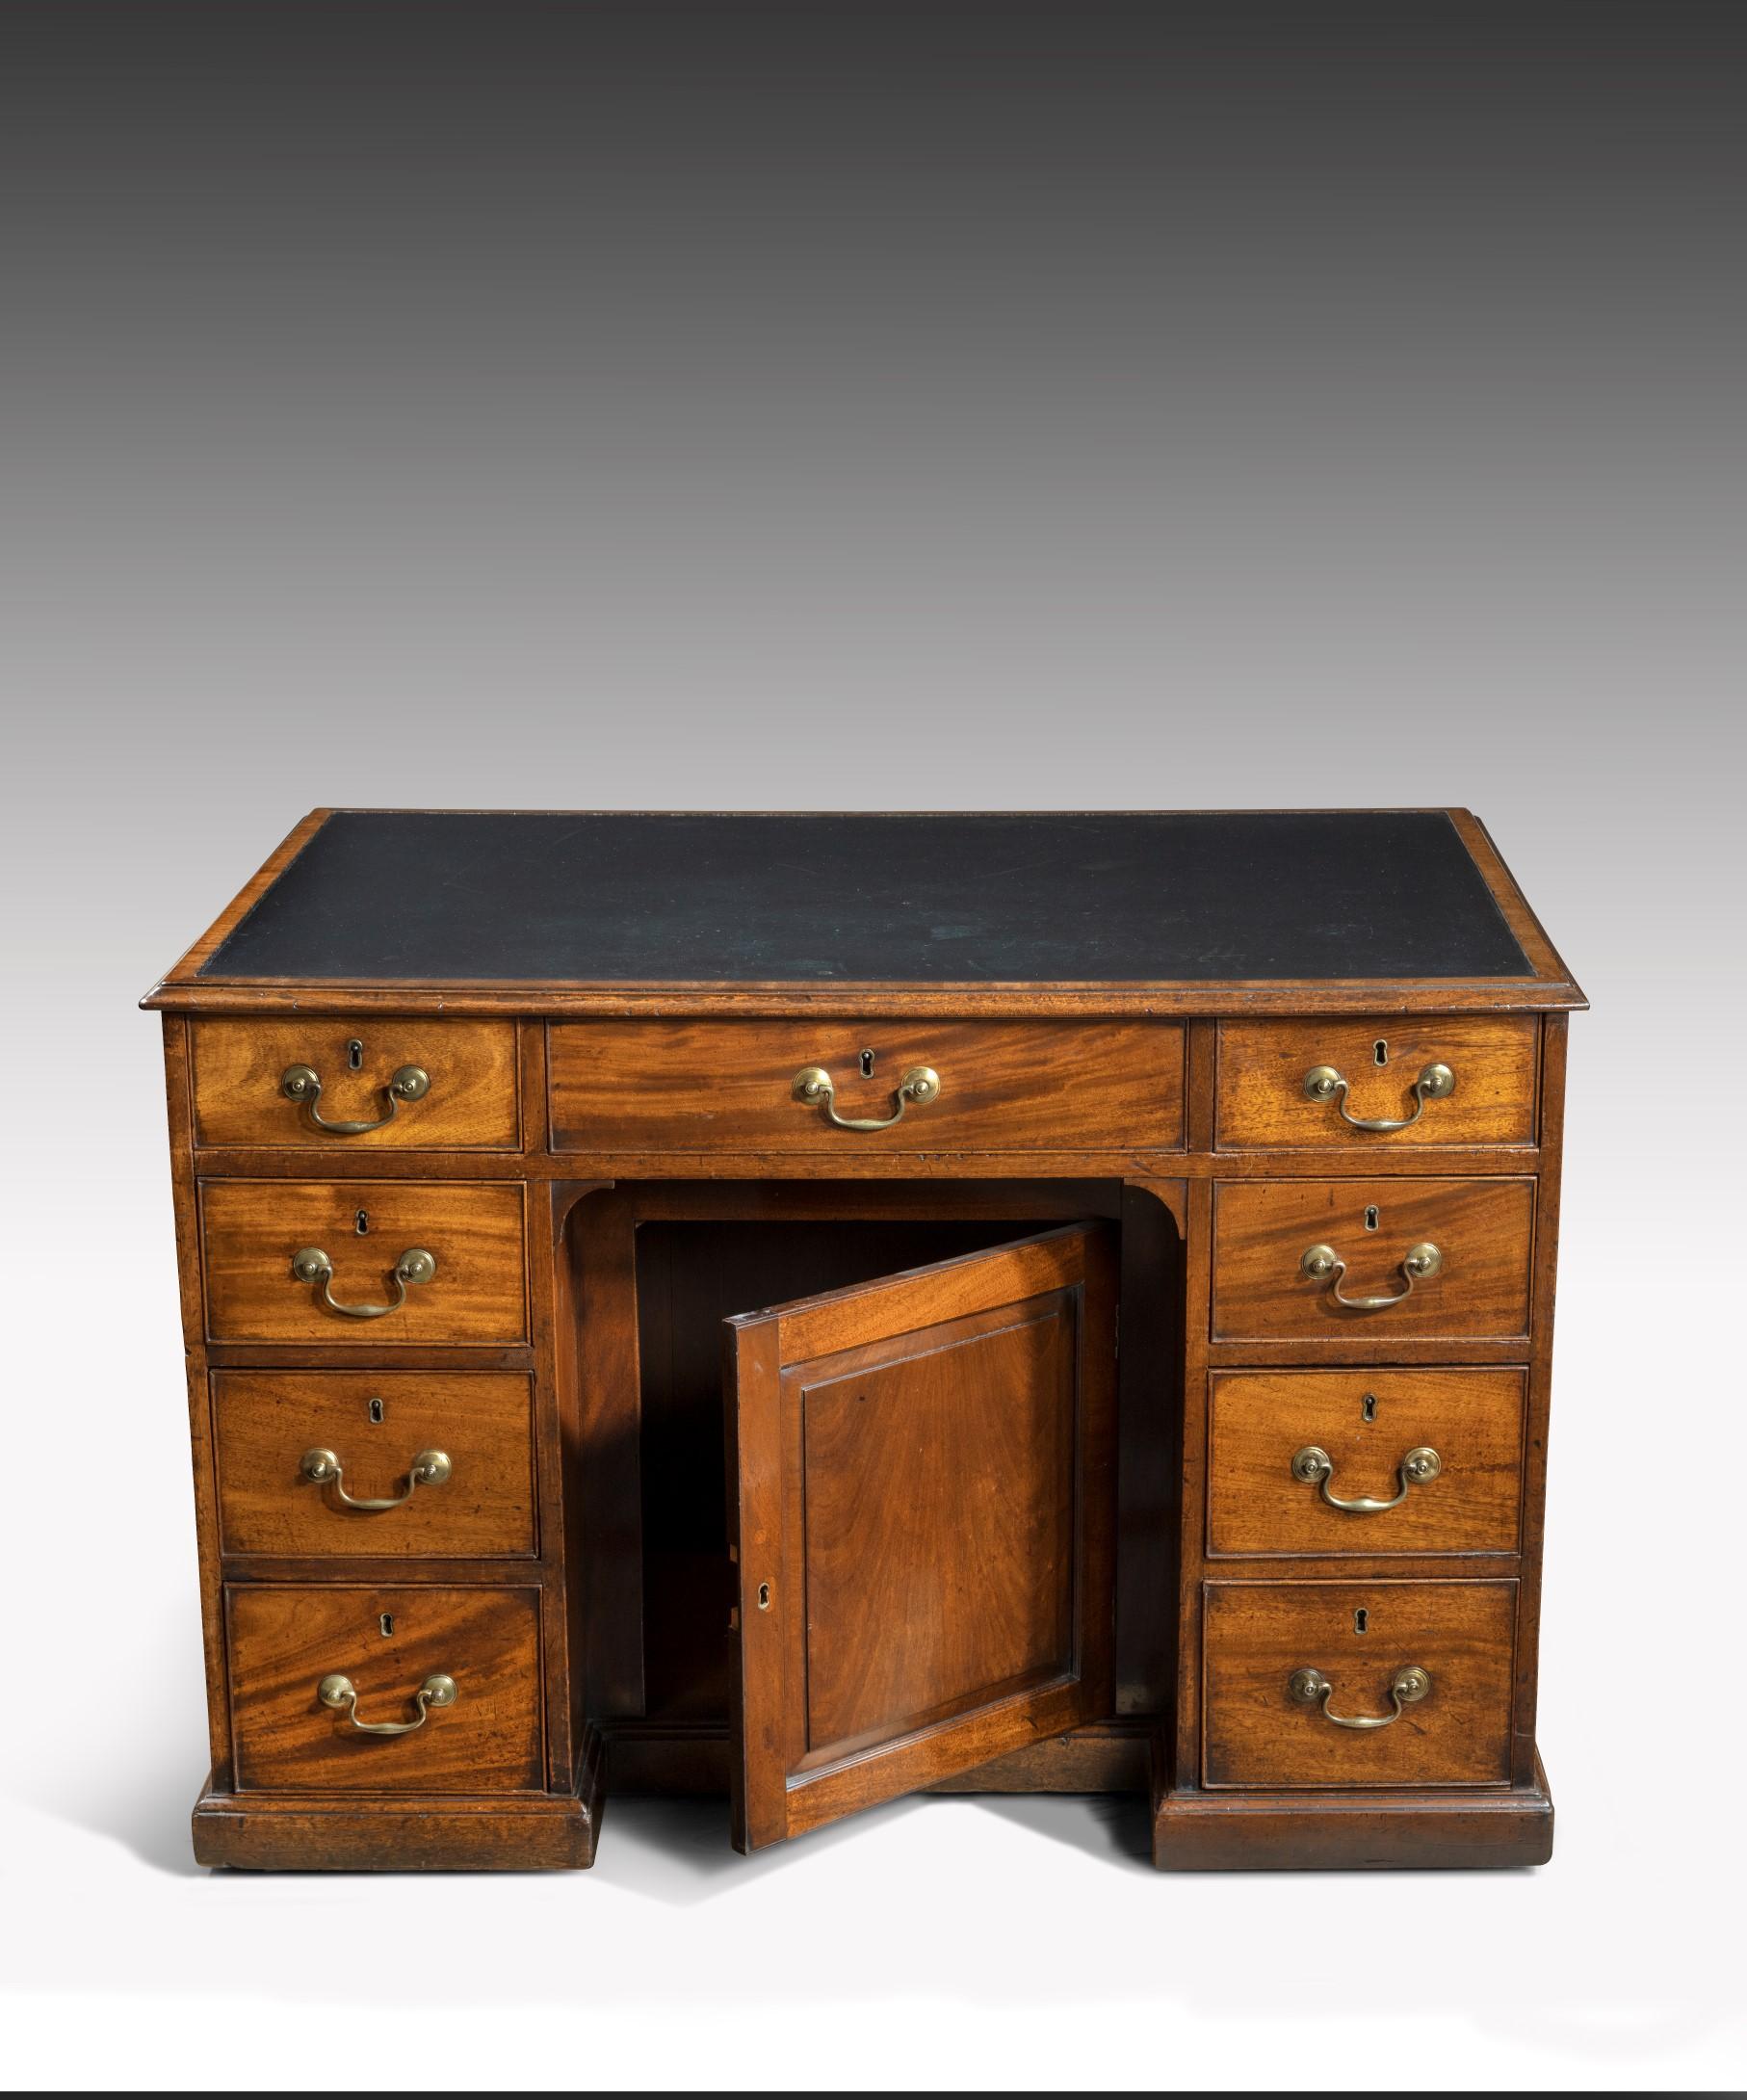 A Georgian Chippendale period mahogany pedestal desk, the desk's leathered top crossbanded in mahogany above three frieze drawers to the front with a central recessed panelled door flanked by banks of three graduated drawers, to the rear of the desk